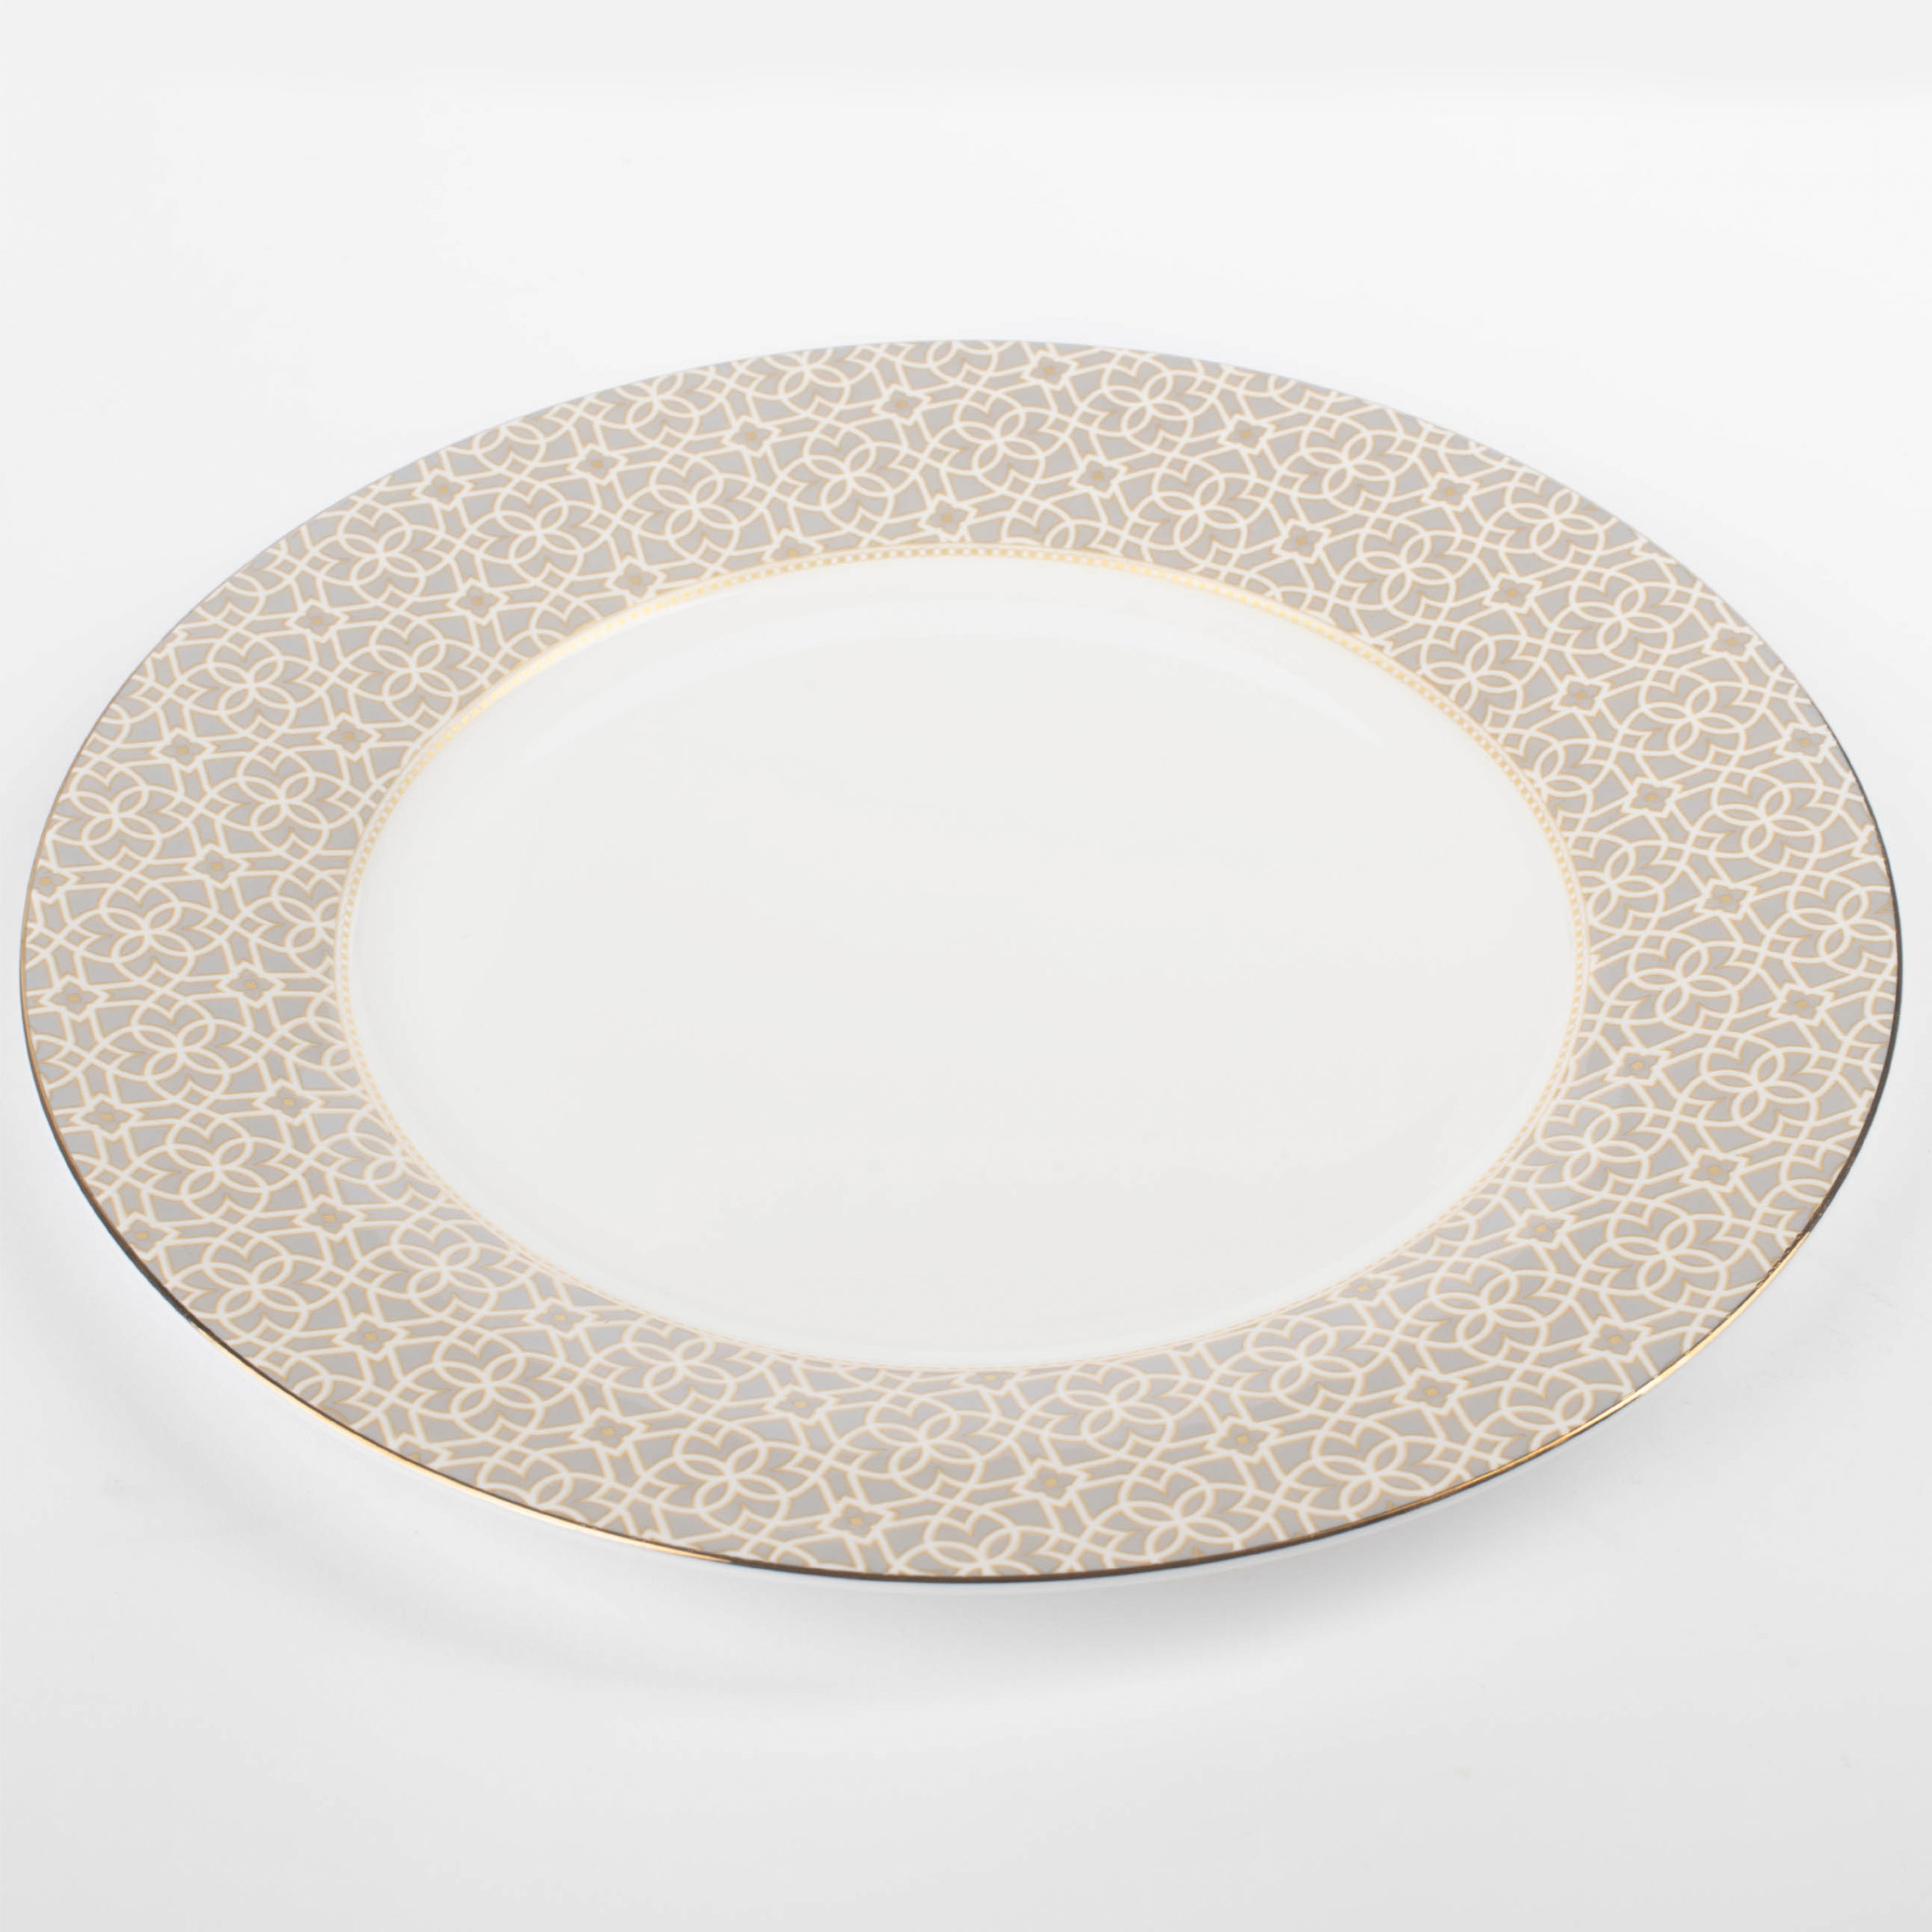 Dining plate, 27 cm, porcelain F, gray, with golden edging, Ornament, Liberty изображение № 2